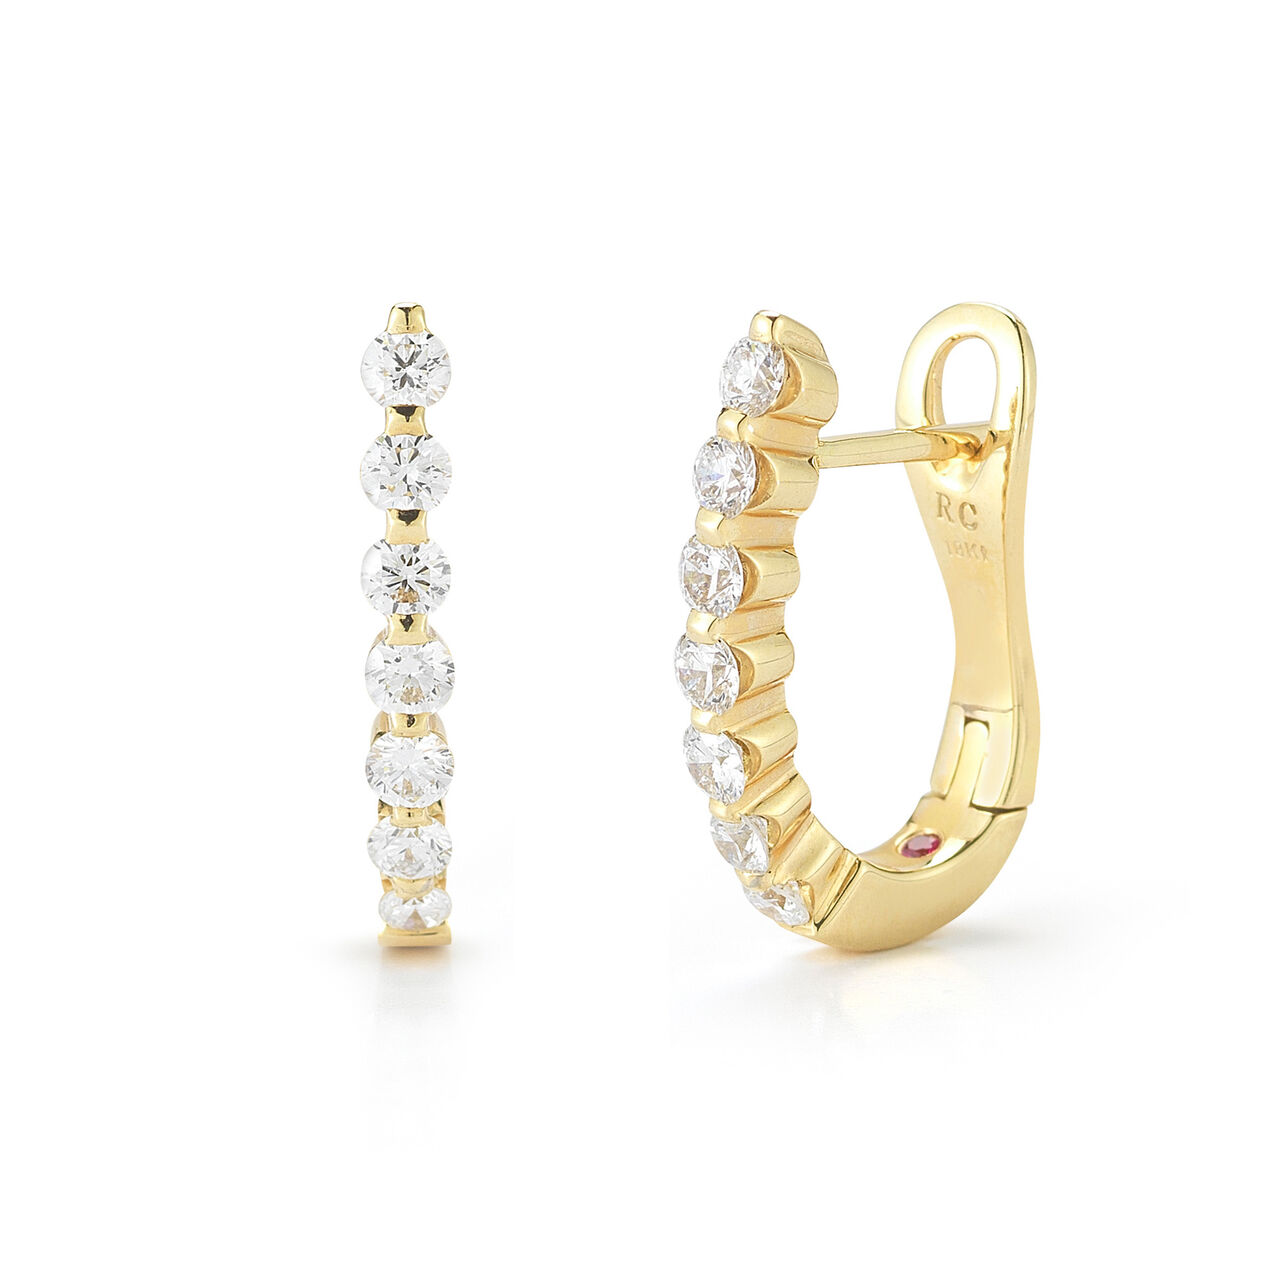 Roberto Coin Perfect Diamond Yellow Gold Hoops Earrings 000466AYERX0 image number 0